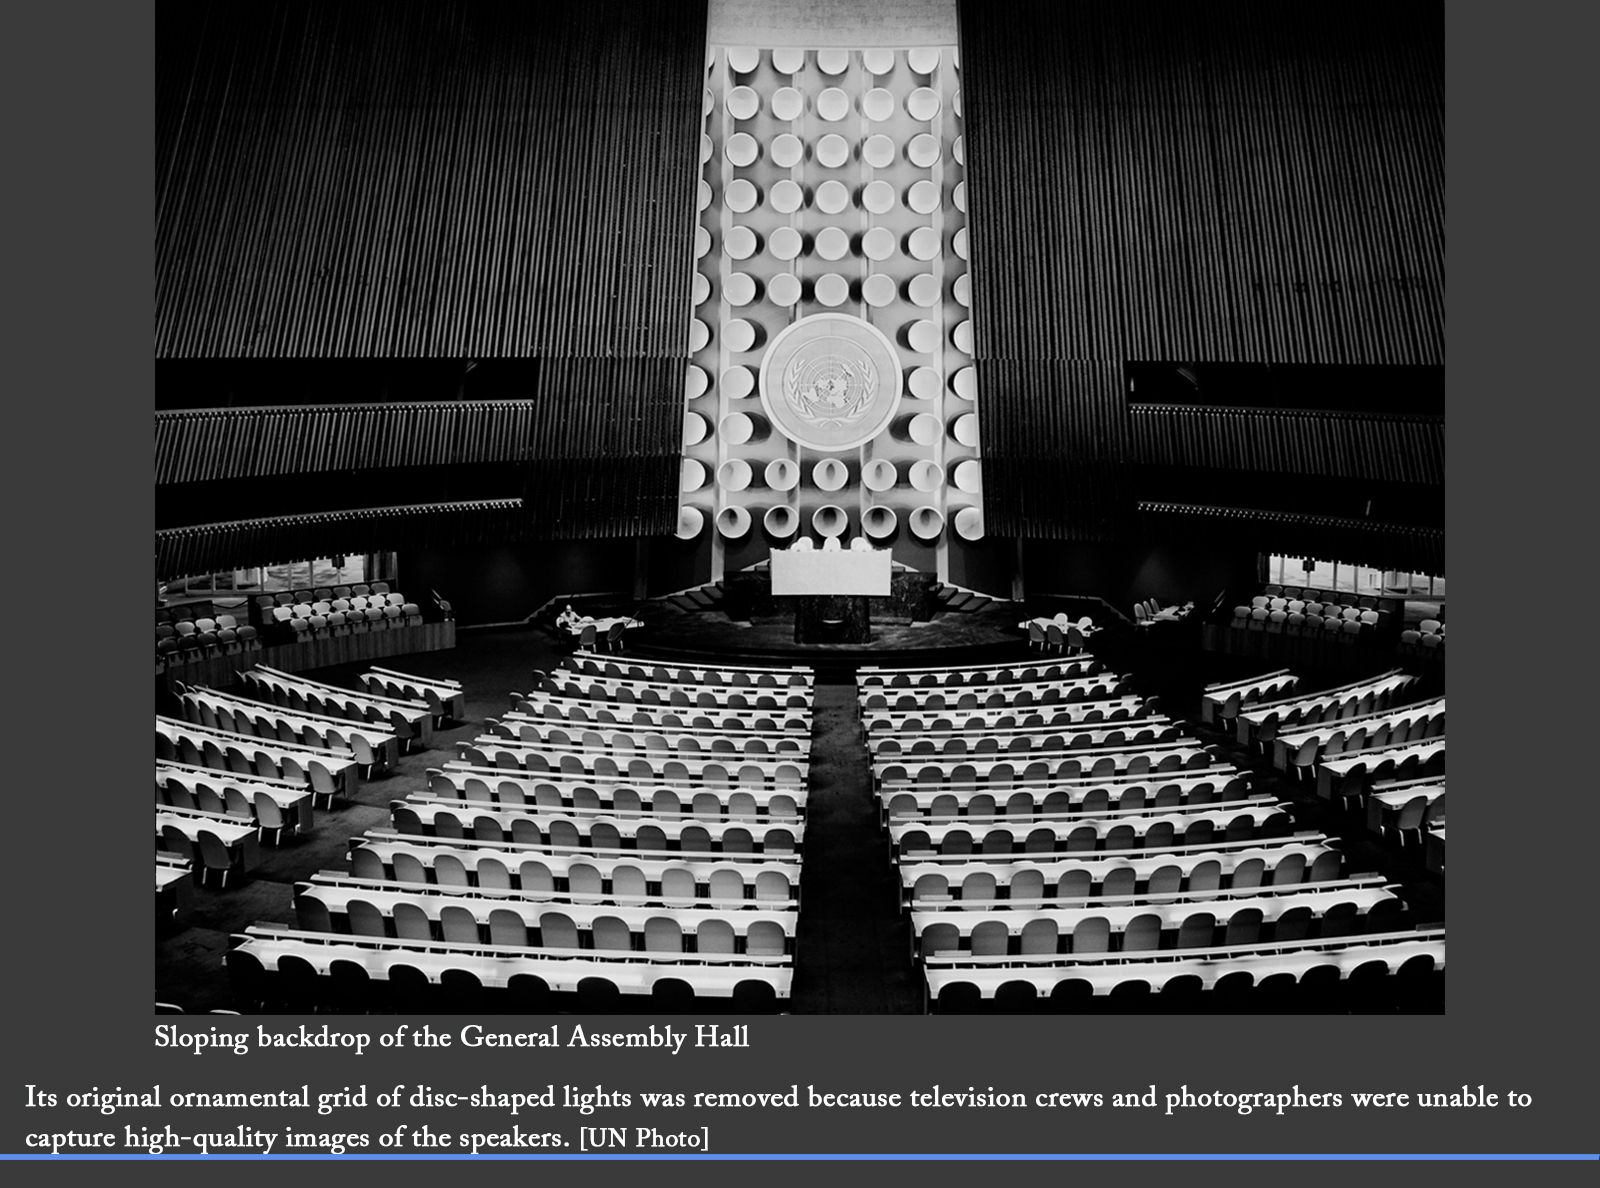 The sloping backdrop of the General Assembly Hall with its original ornamental grid of disc-shaped lights. They were removed because television crews and photographers were unable to capture high-quality images of the speakers.